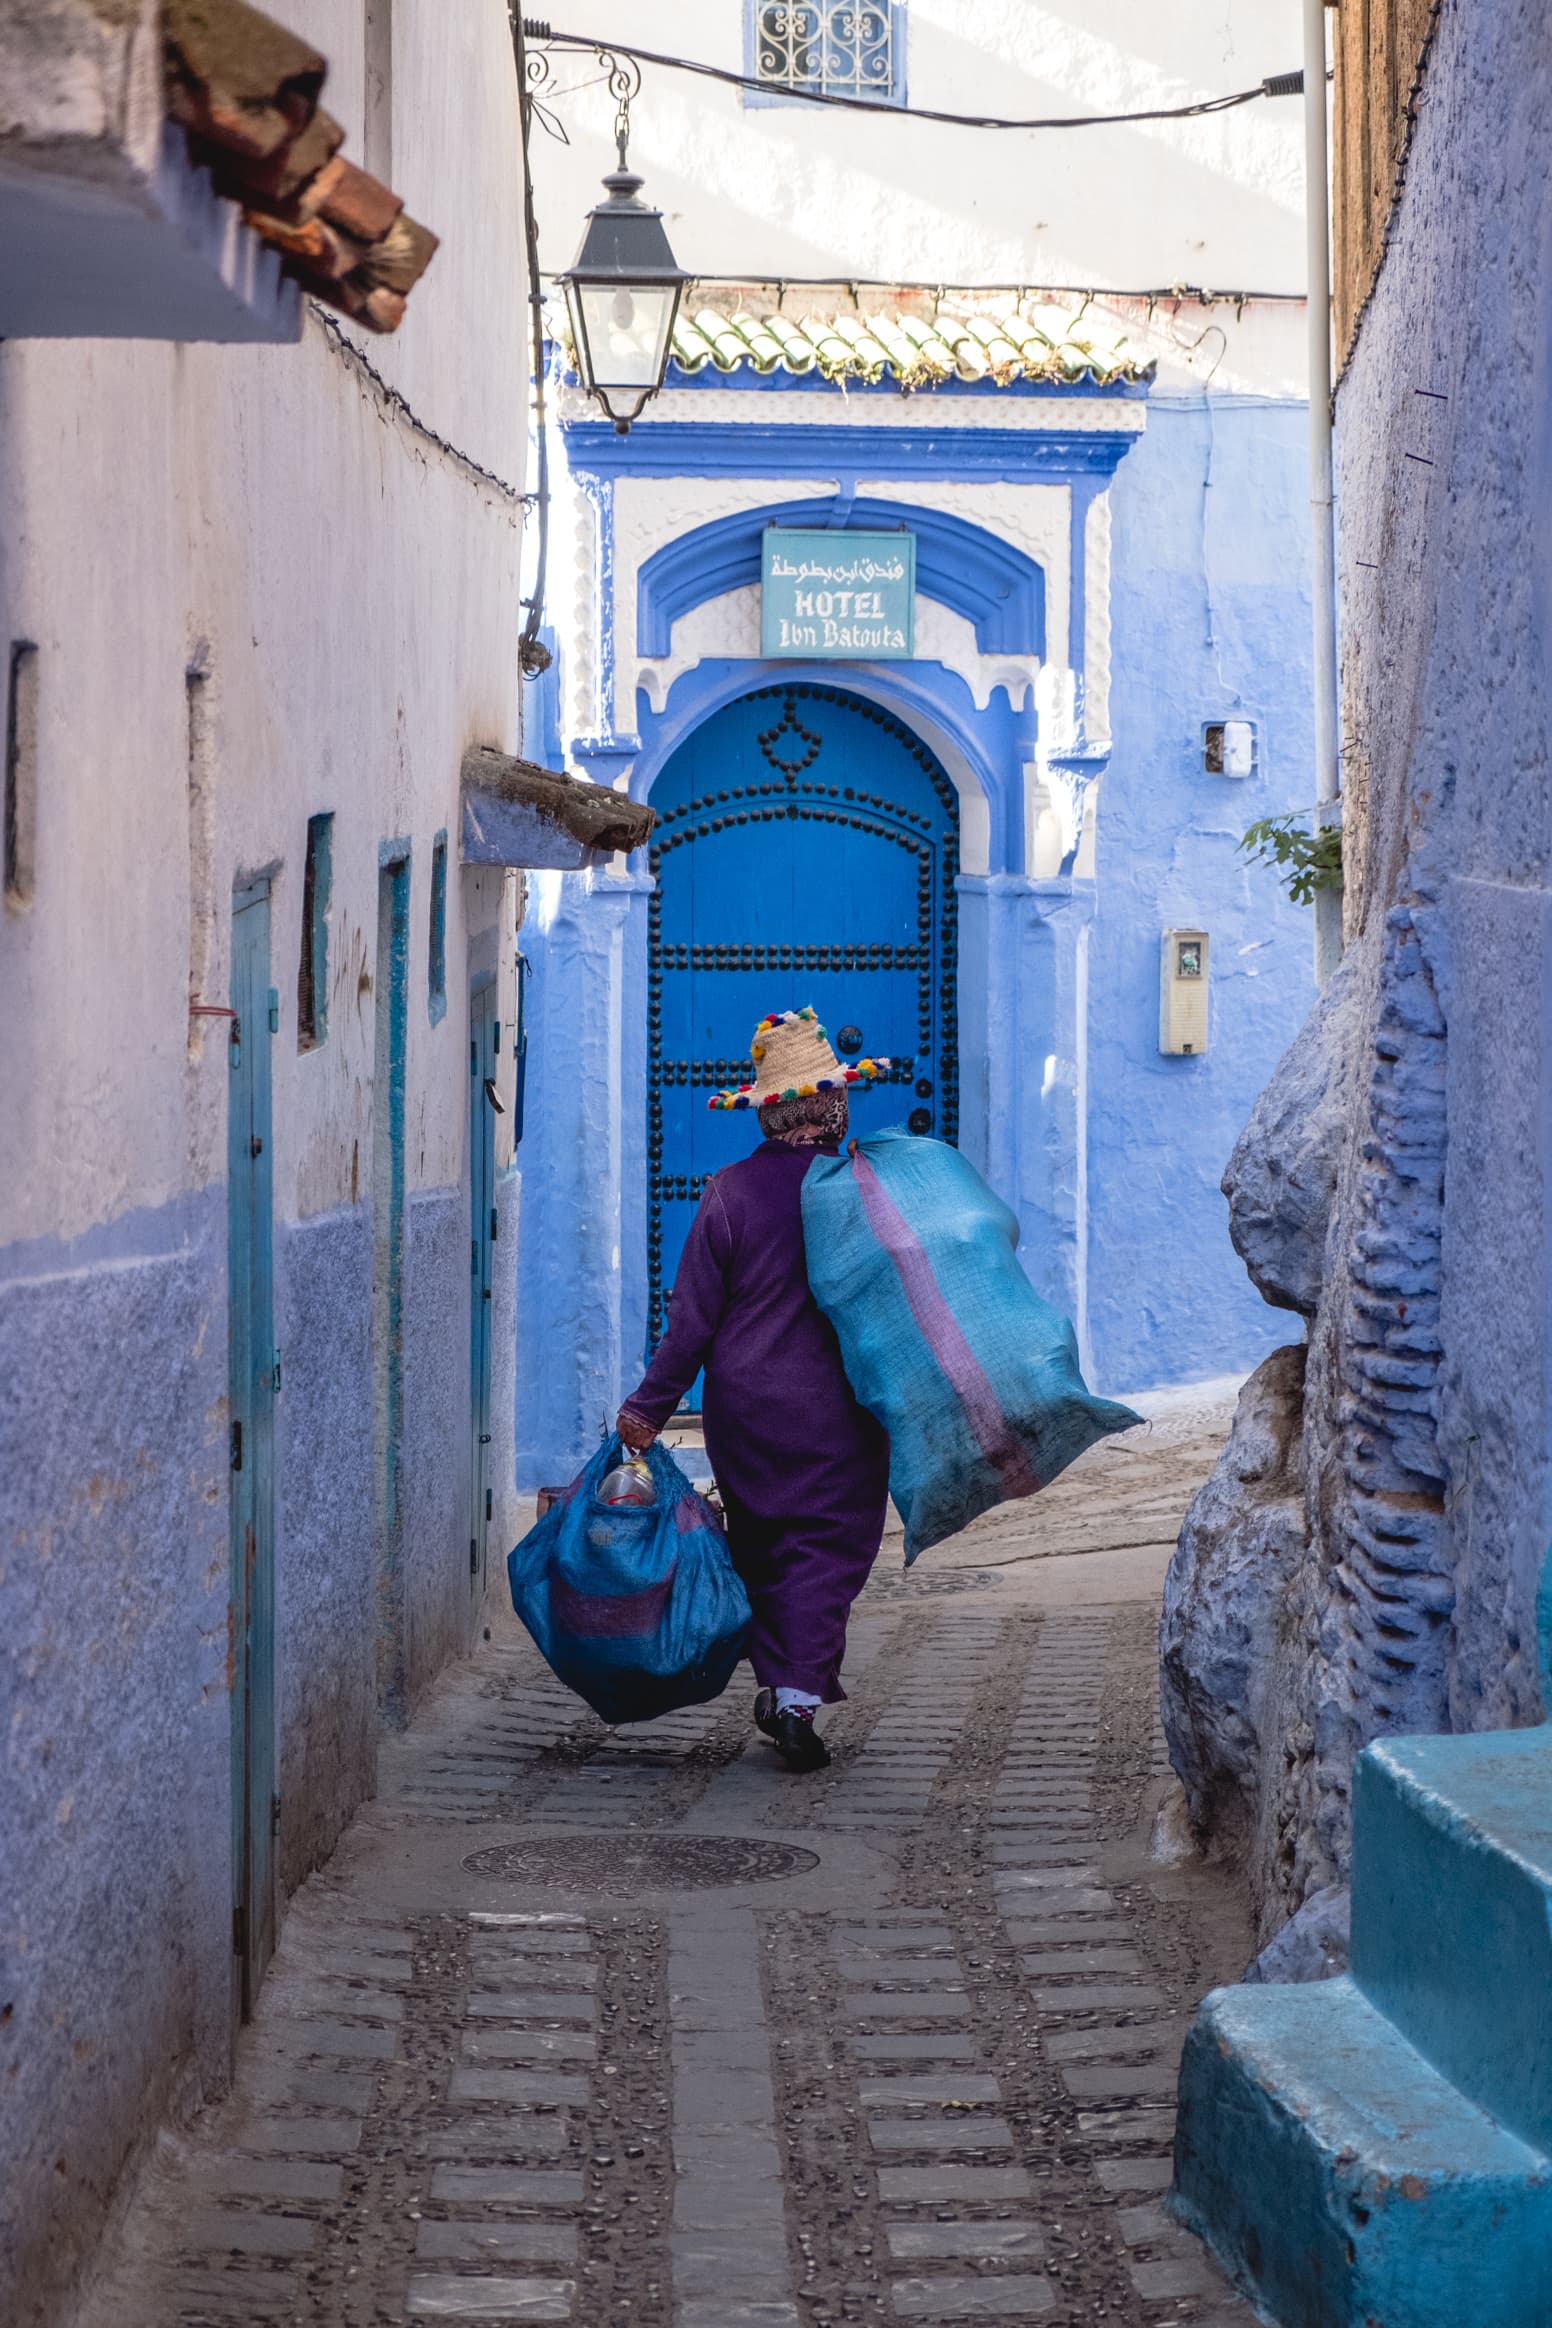 A working woman in traditional Berber dress, Chefchaouen, Morocco